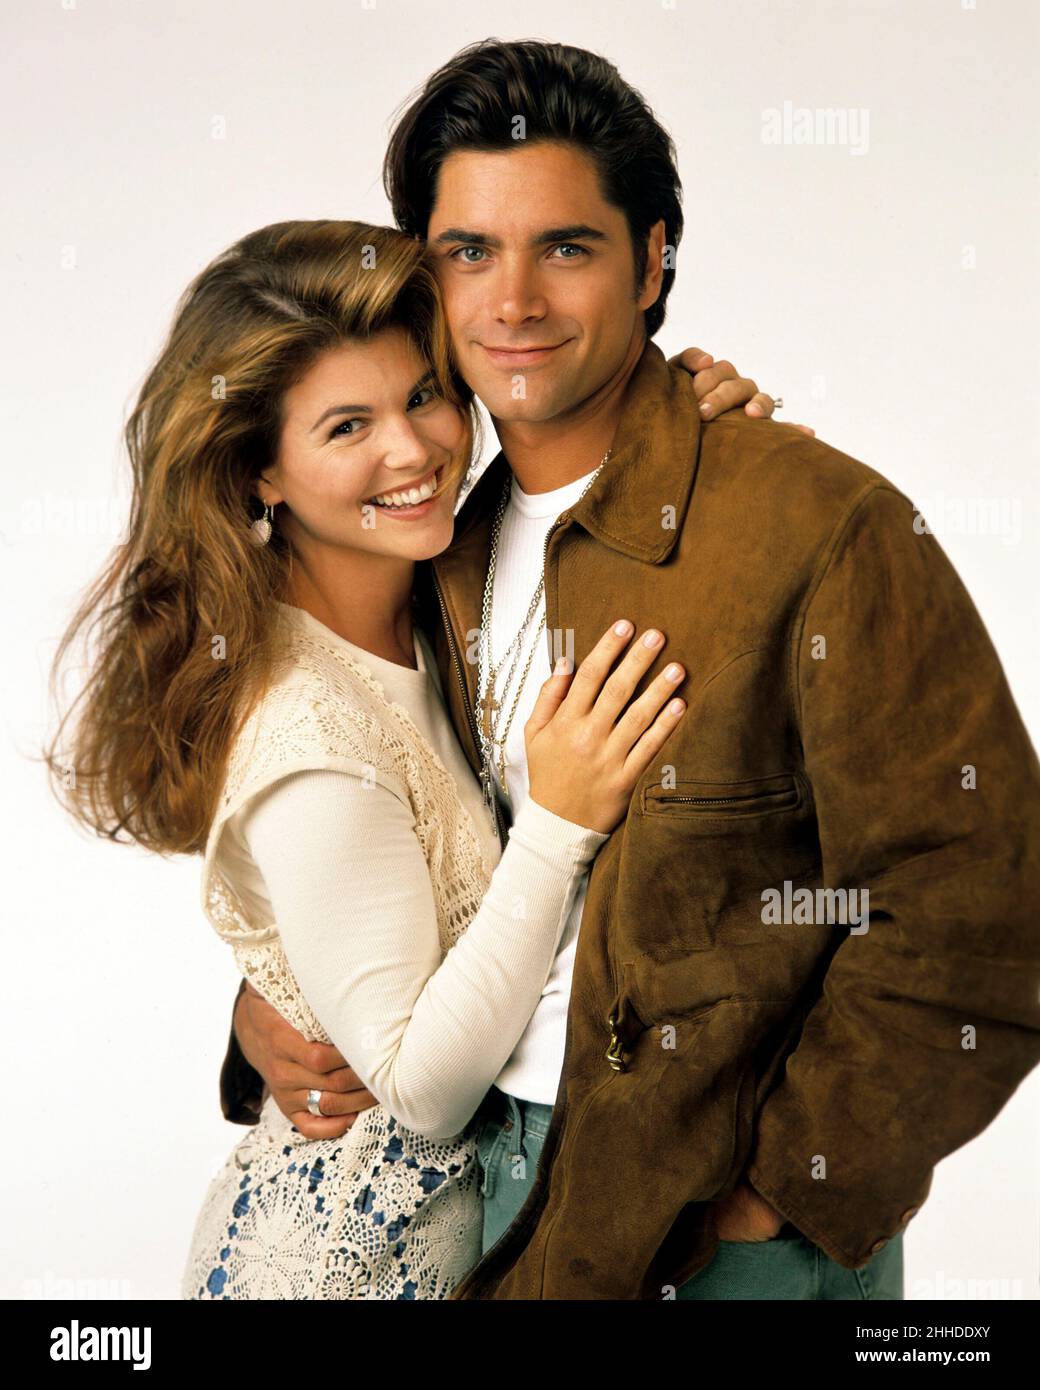 LORI LOUGHLIN and JOHN STAMOS in FULL HOUSE (1987), directed by JEFF FRANKLIN. Credit: LORIMAR PRODUCTIONS / Album Stock Photo